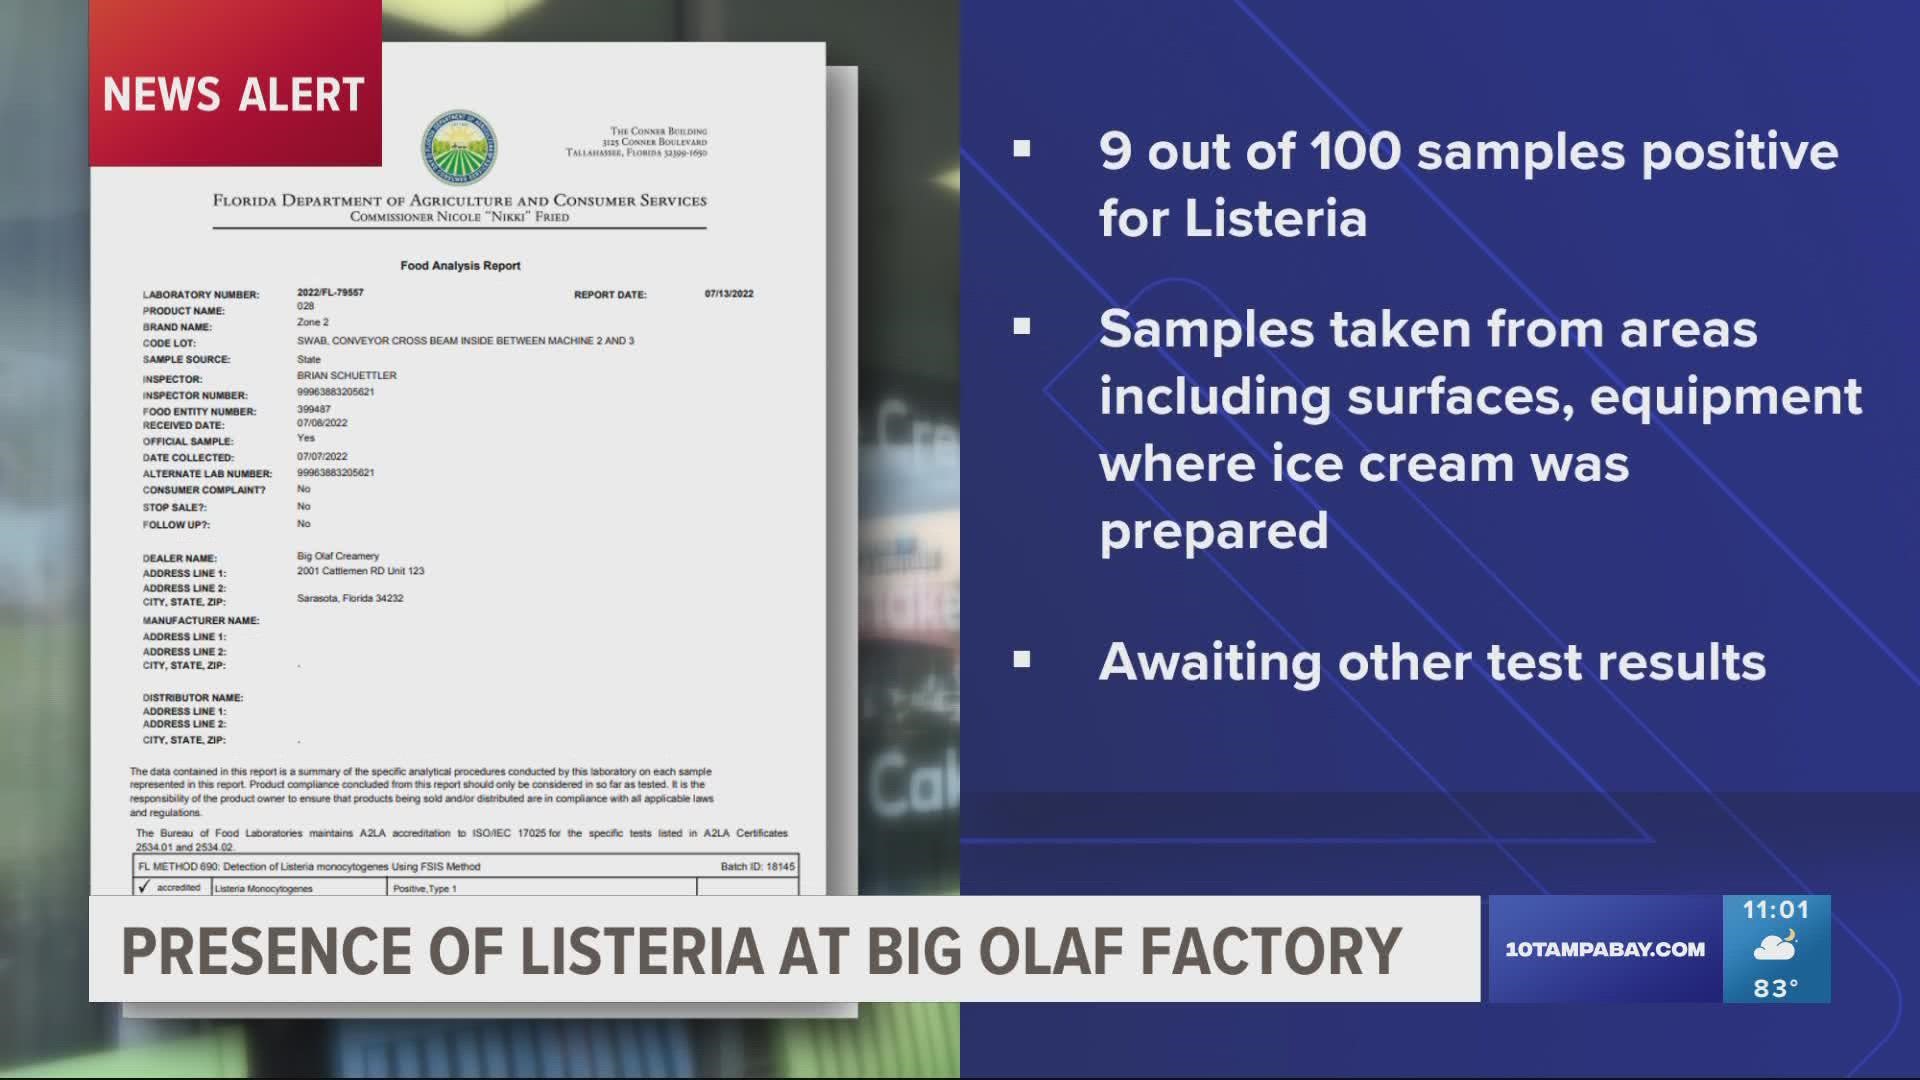 The Florida Department of Agriculture & Consumer Services has issued a stop use order of the equipment where Listeria was found.